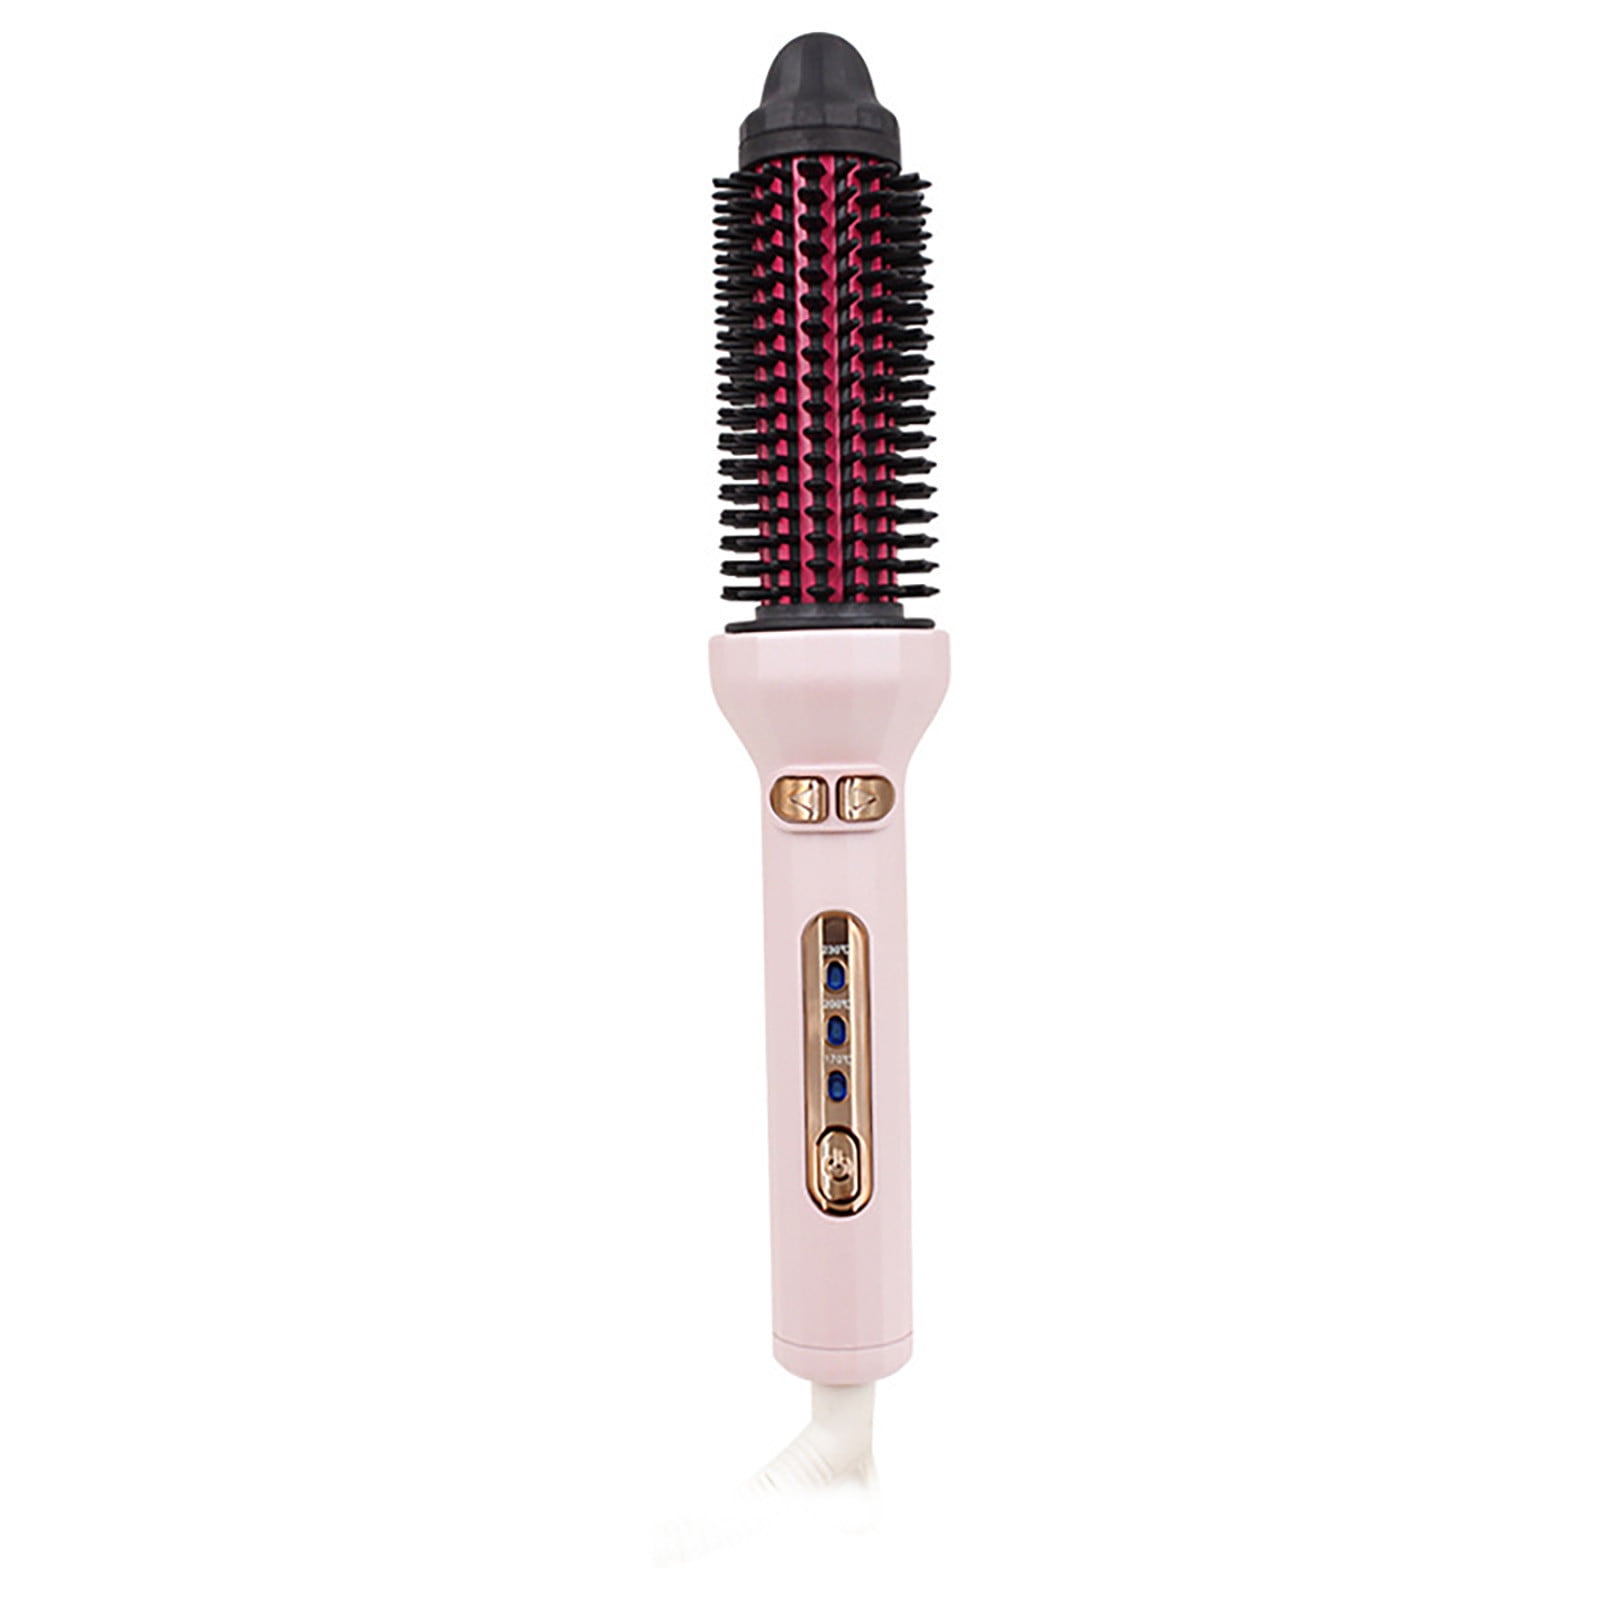 CieKen 2 In 1 Hair Dryer Brush Automatic Rotating Roller Professional Hot  Air Styler 